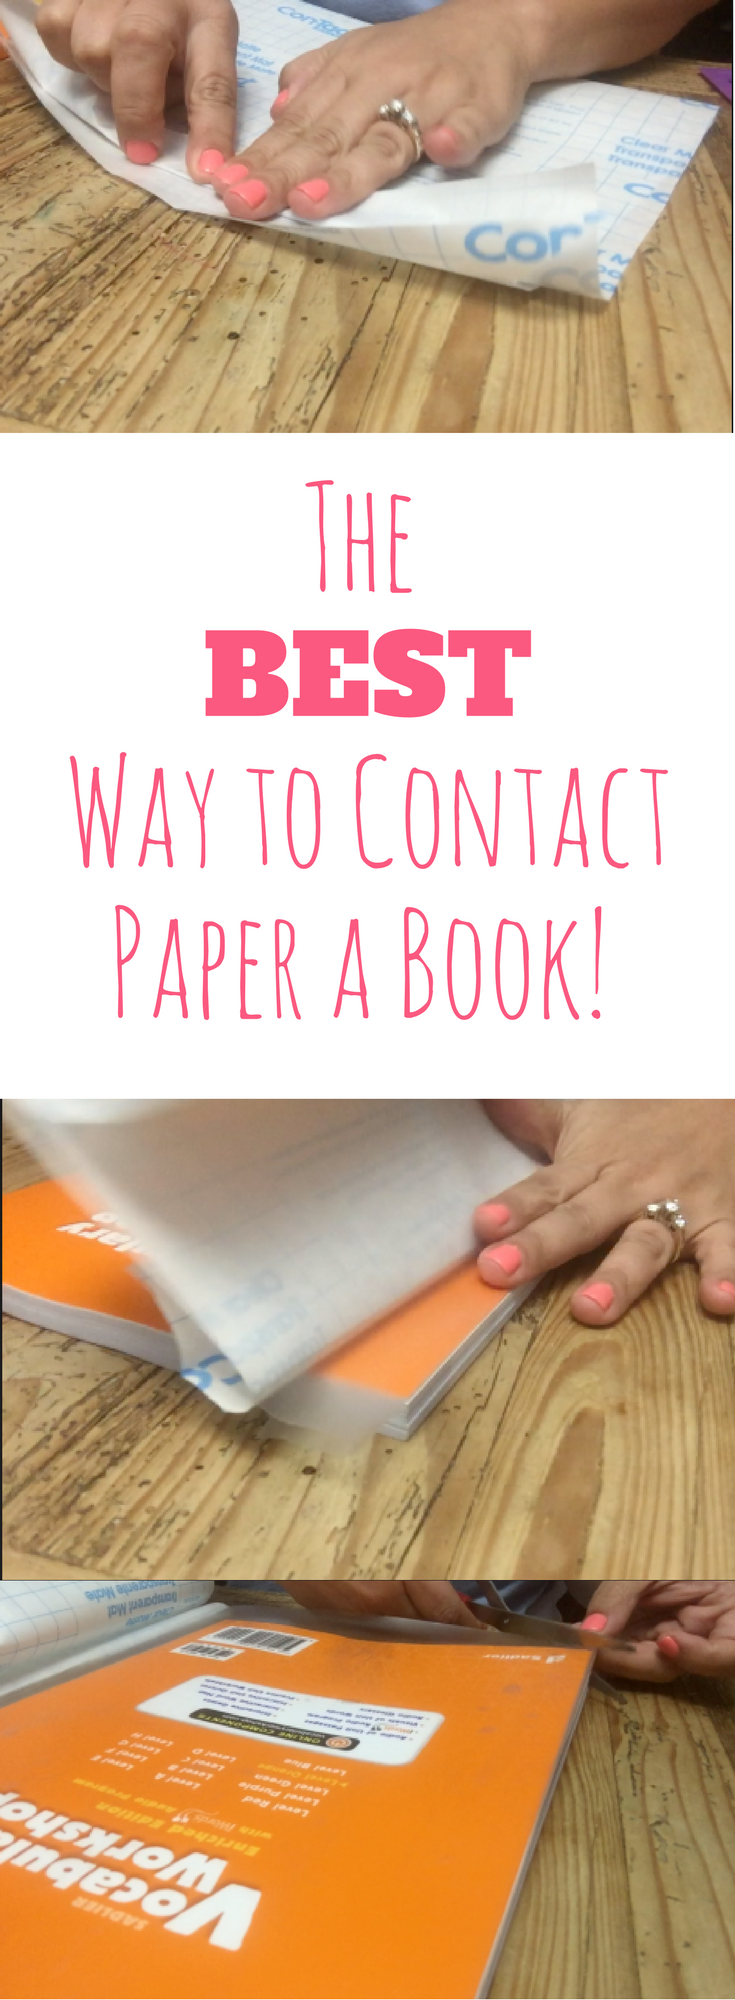 The BEST Way to Contact Paper a Book